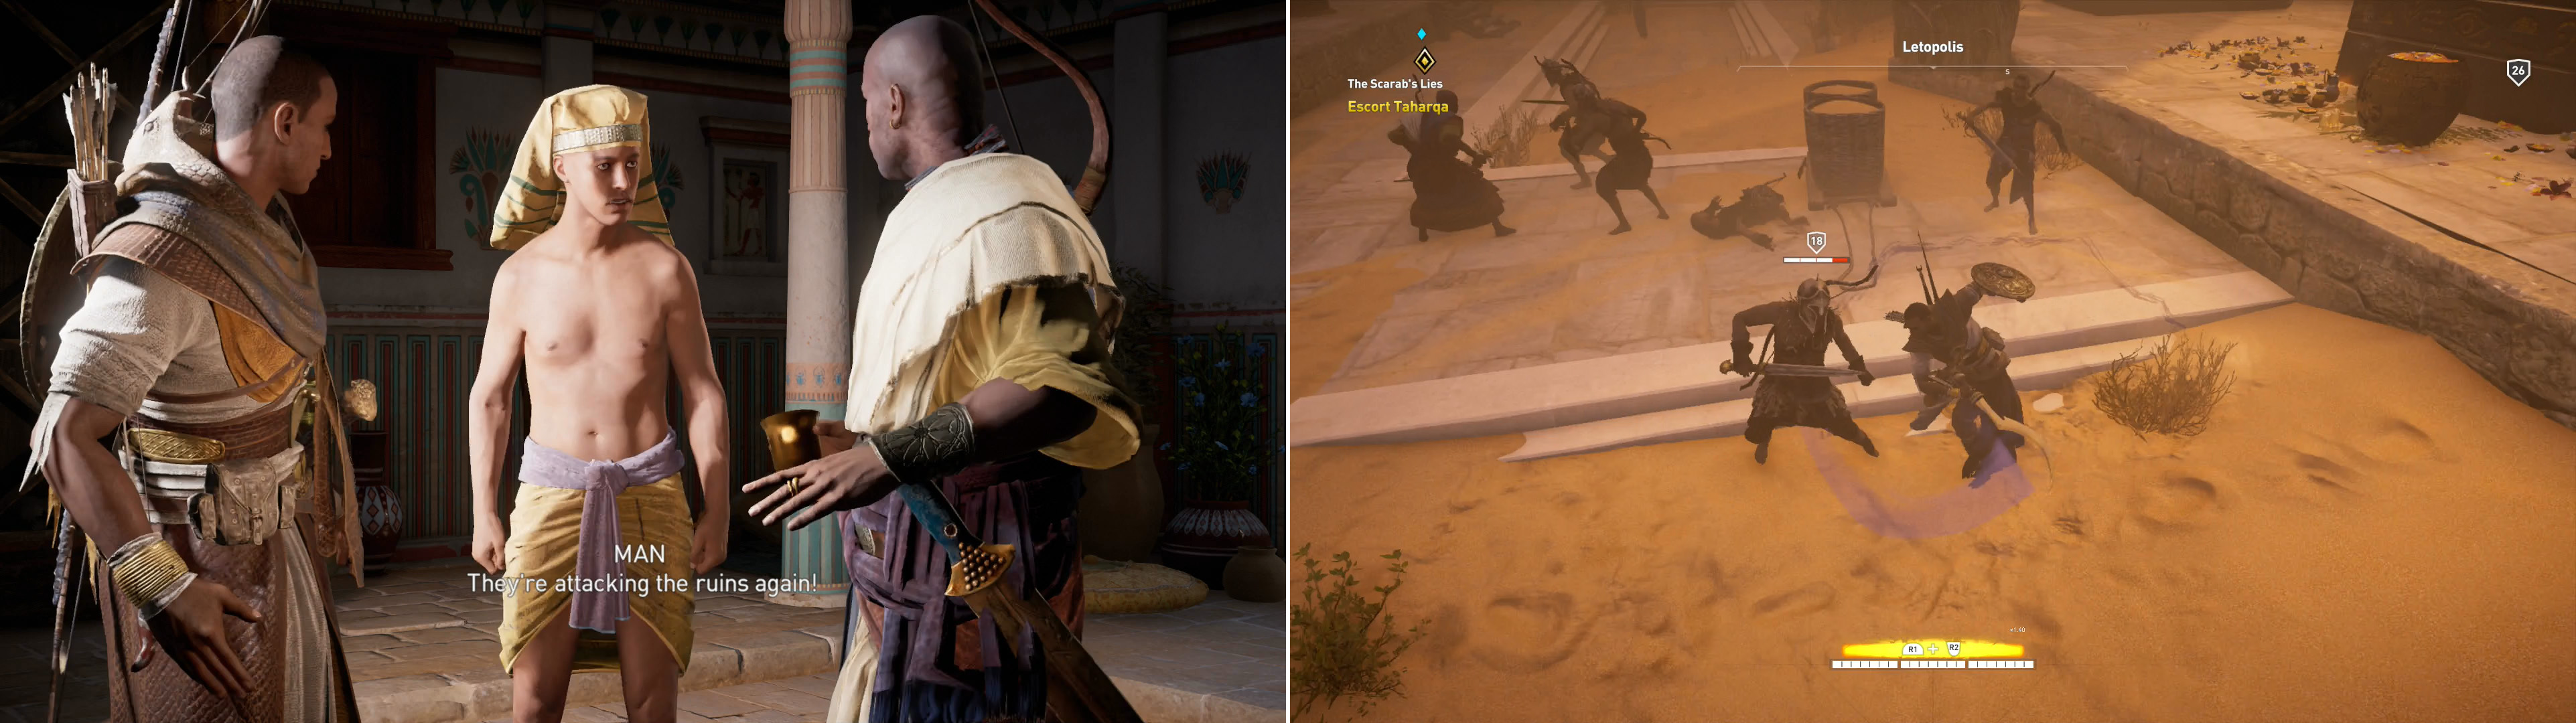 Your meeting with Taharqa will be cut short by a bandit attack (left). Follow Taharqa through Letopolis and kill all the foes who dare oppose you (right).